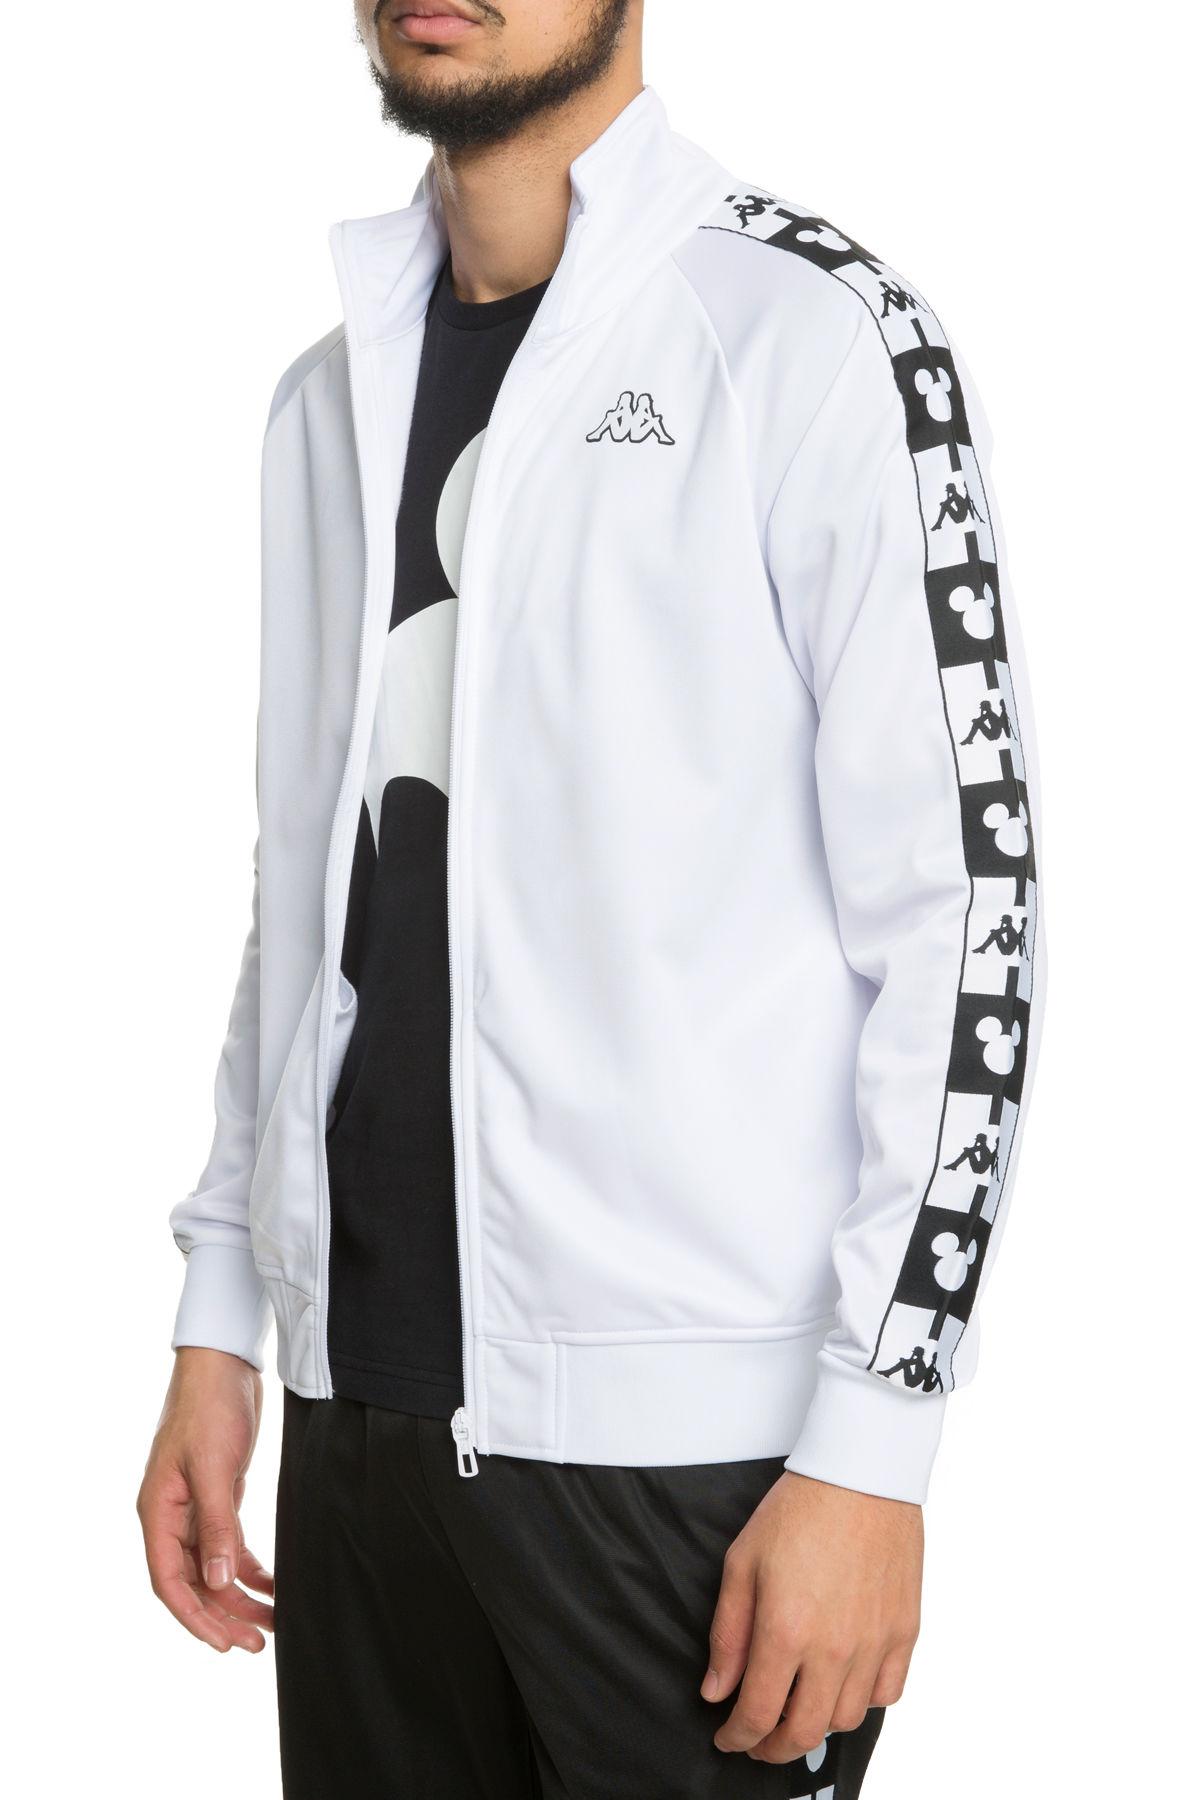 Lyst Kappa The Authentic Anne Disney Jacket In White in